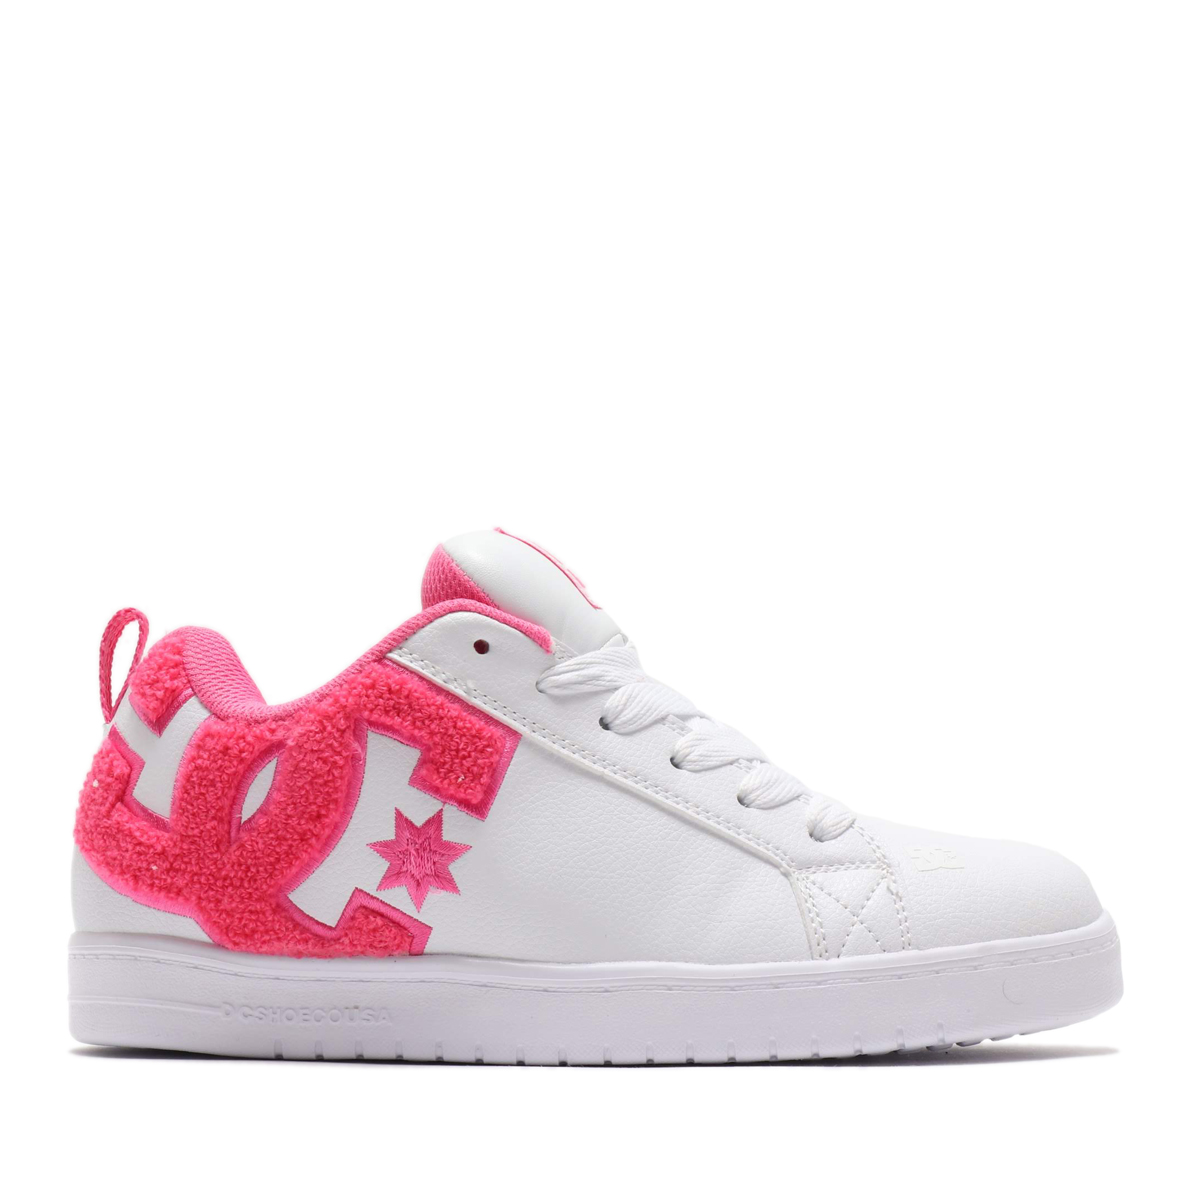 pink and white dc shoes